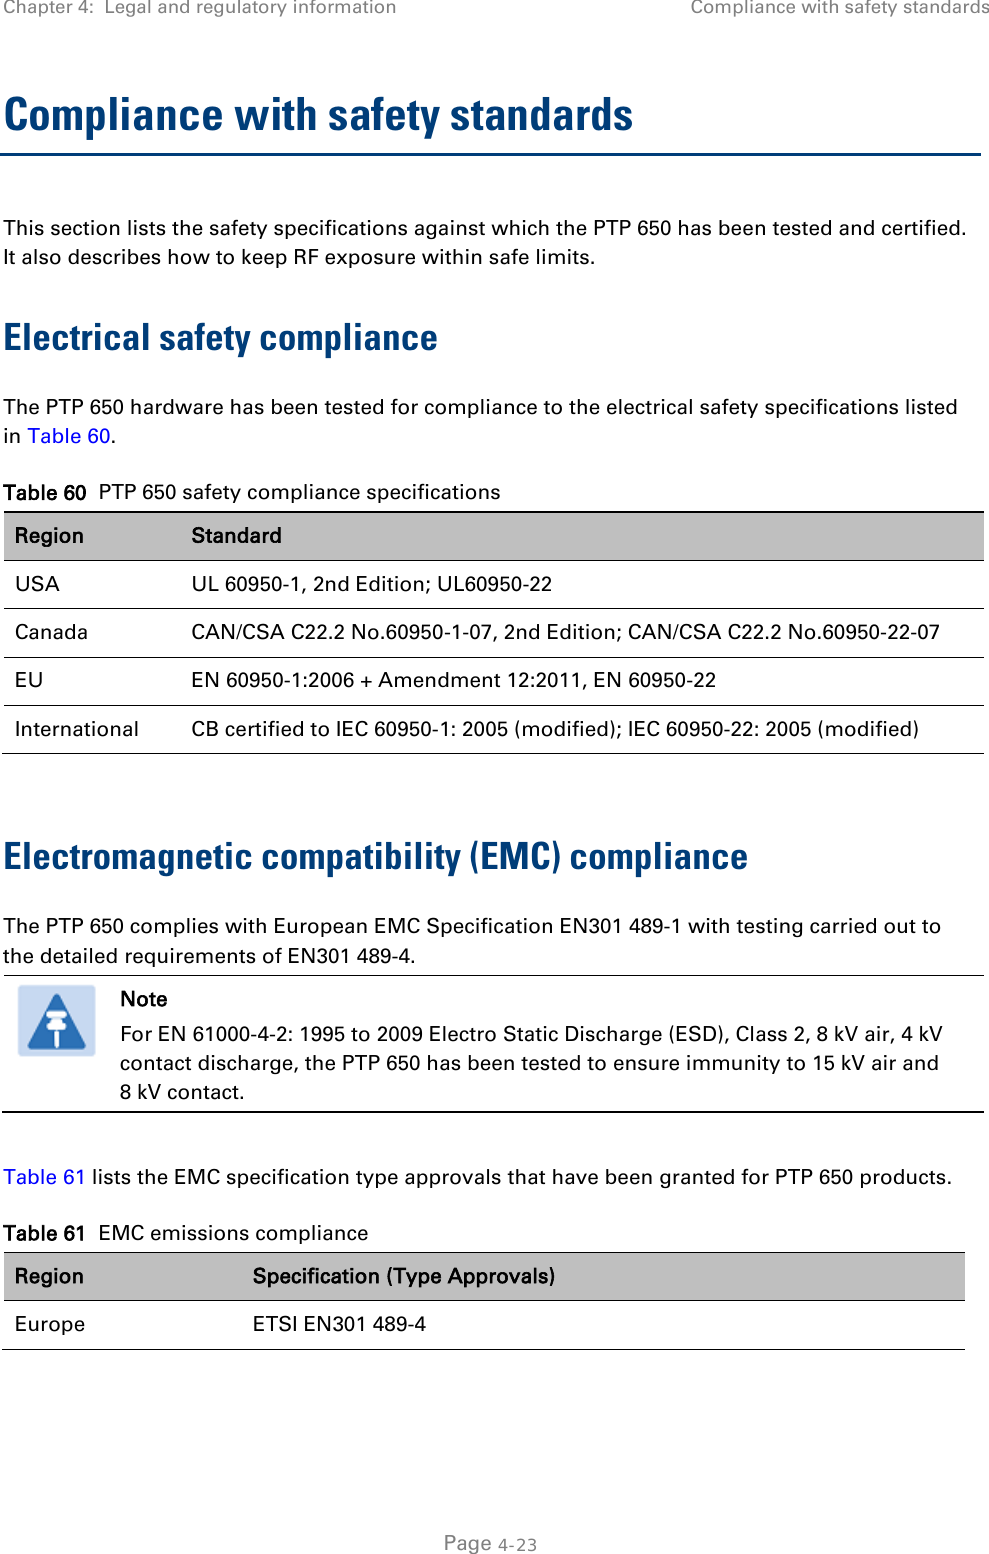 Chapter 4:  Legal and regulatory information Compliance with safety standards  Compliance with safety standards This section lists the safety specifications against which the PTP 650 has been tested and certified. It also describes how to keep RF exposure within safe limits. Electrical safety compliance  The PTP 650 hardware has been tested for compliance to the electrical safety specifications listed in Table 60. Table 60  PTP 650 safety compliance specifications Region Standard USA UL 60950-1, 2nd Edition; UL60950-22 Canada CAN/CSA C22.2 No.60950-1-07, 2nd Edition; CAN/CSA C22.2 No.60950-22-07 EU EN 60950-1:2006 + Amendment 12:2011, EN 60950-22 International CB certified to IEC 60950-1: 2005 (modified); IEC 60950-22: 2005 (modified)  Electromagnetic compatibility (EMC) compliance The PTP 650 complies with European EMC Specification EN301 489-1 with testing carried out to the detailed requirements of EN301 489-4.   Note For EN 61000-4-2: 1995 to 2009 Electro Static Discharge (ESD), Class 2, 8 kV air, 4 kV contact discharge, the PTP 650 has been tested to ensure immunity to 15 kV air and 8 kV contact.  Table 61 lists the EMC specification type approvals that have been granted for PTP 650 products. Table 61  EMC emissions compliance Region Specification (Type Approvals) Europe ETSI EN301 489-4   Page 4-23 